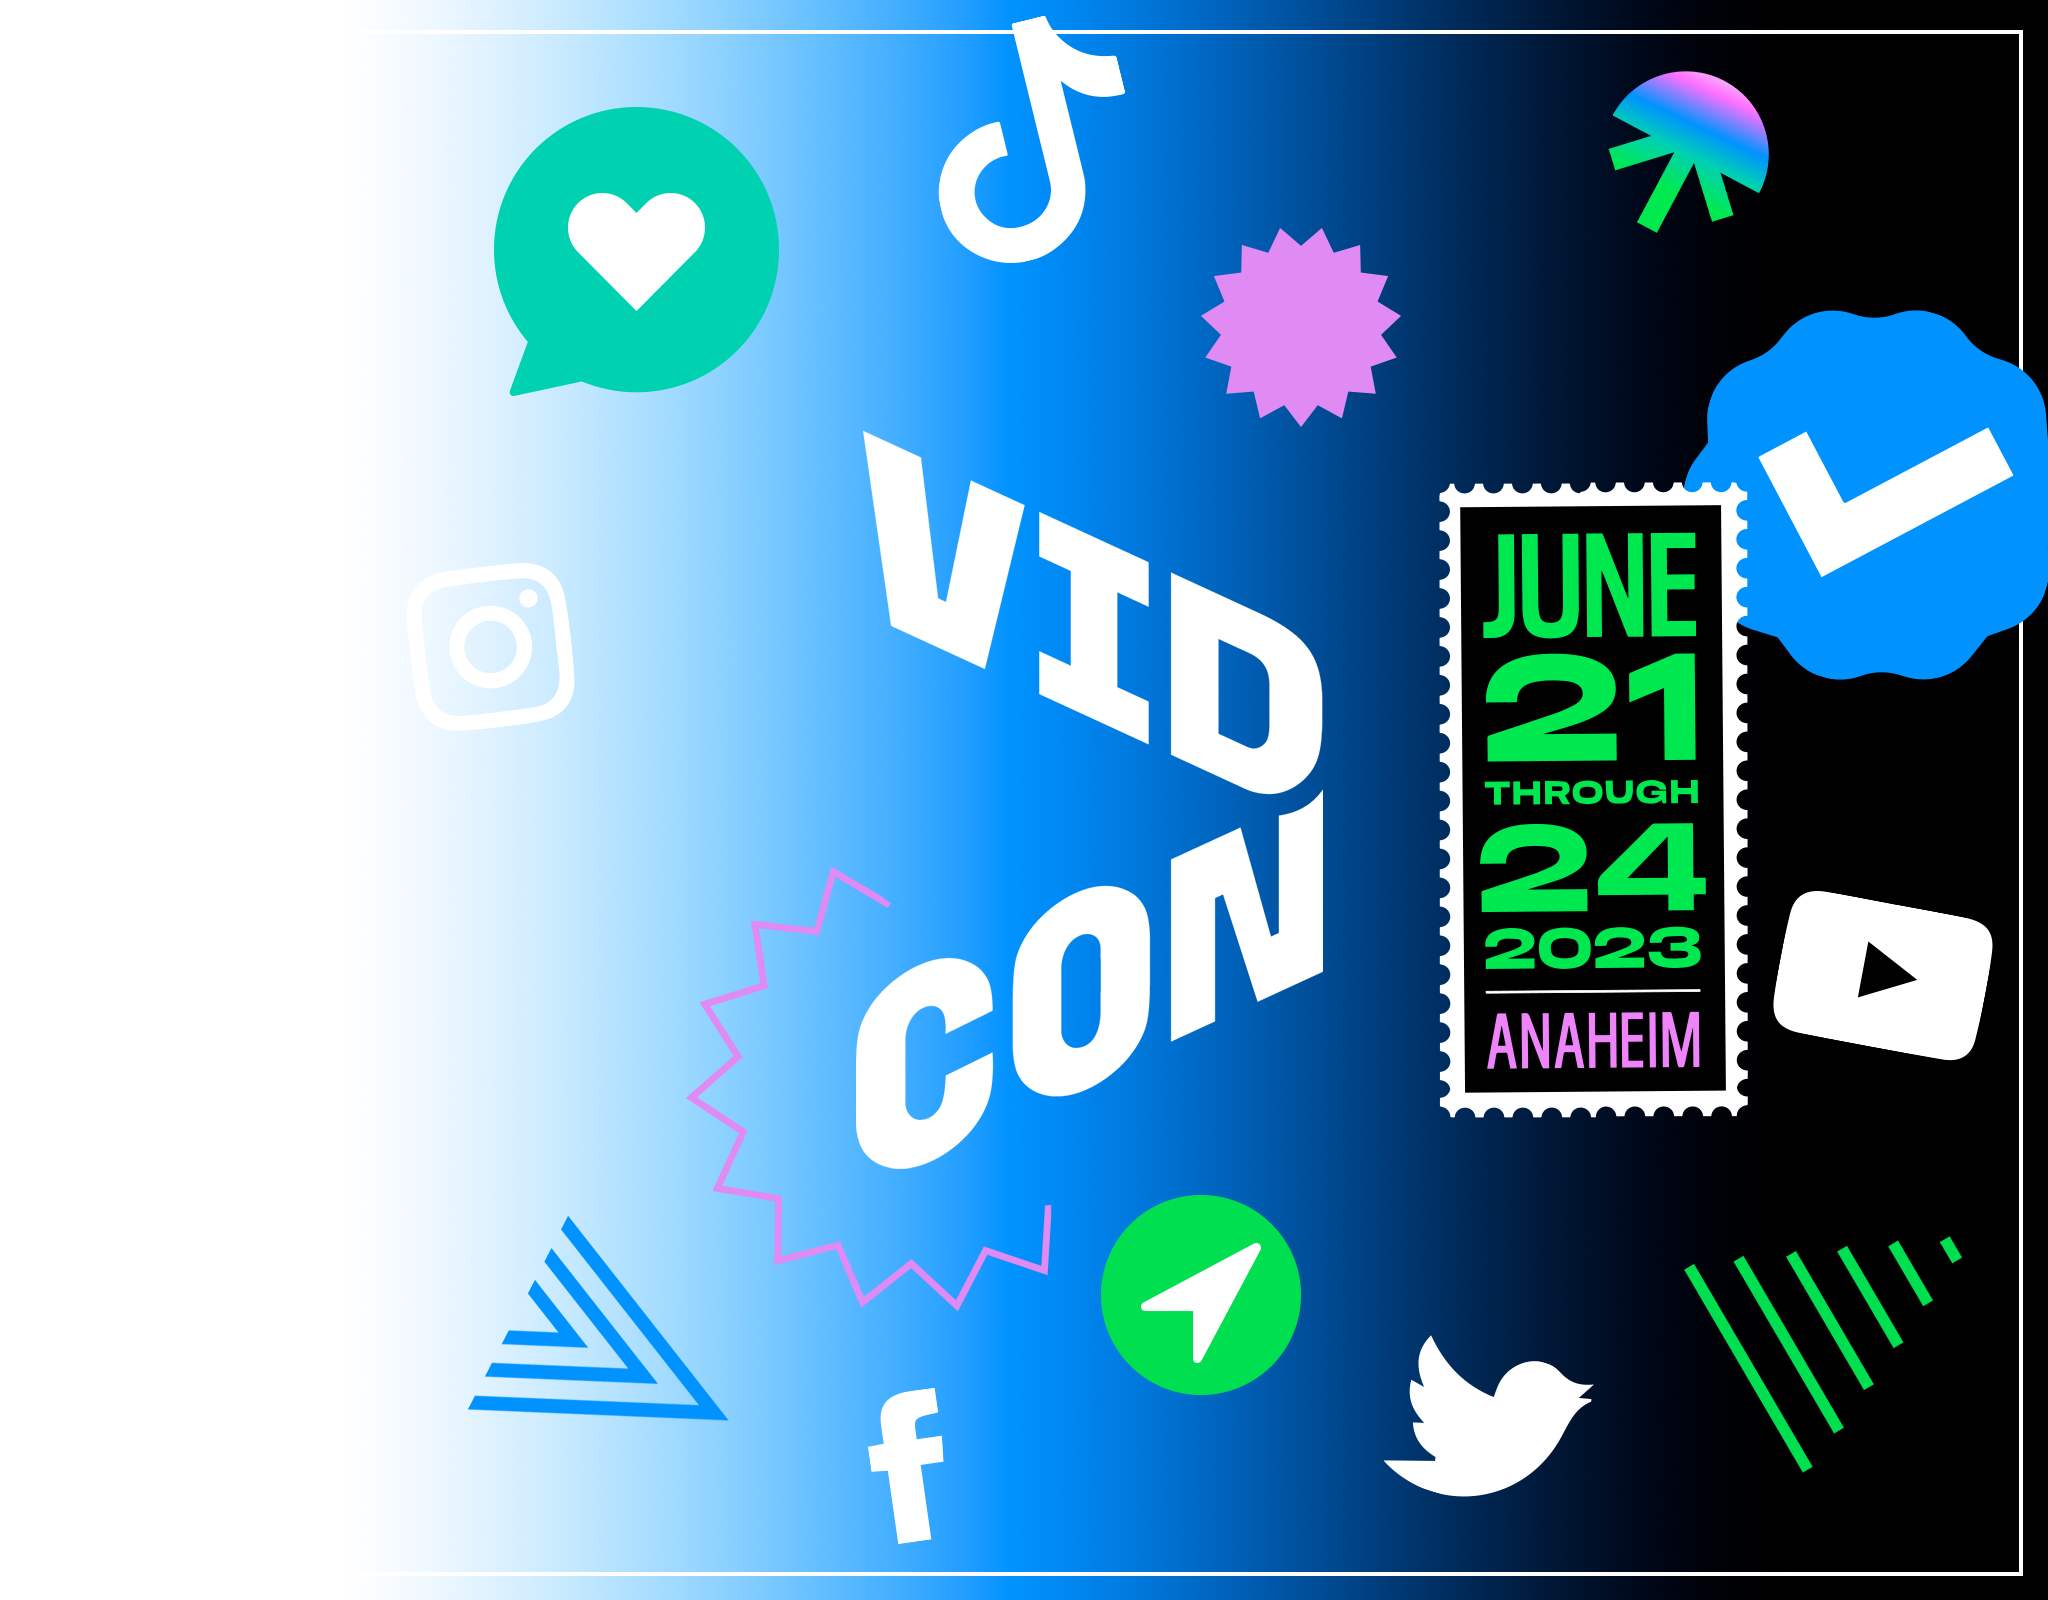 Colorful graphic with VidCon logo, Twitter, TikTok, Facebook, and YouTube logos